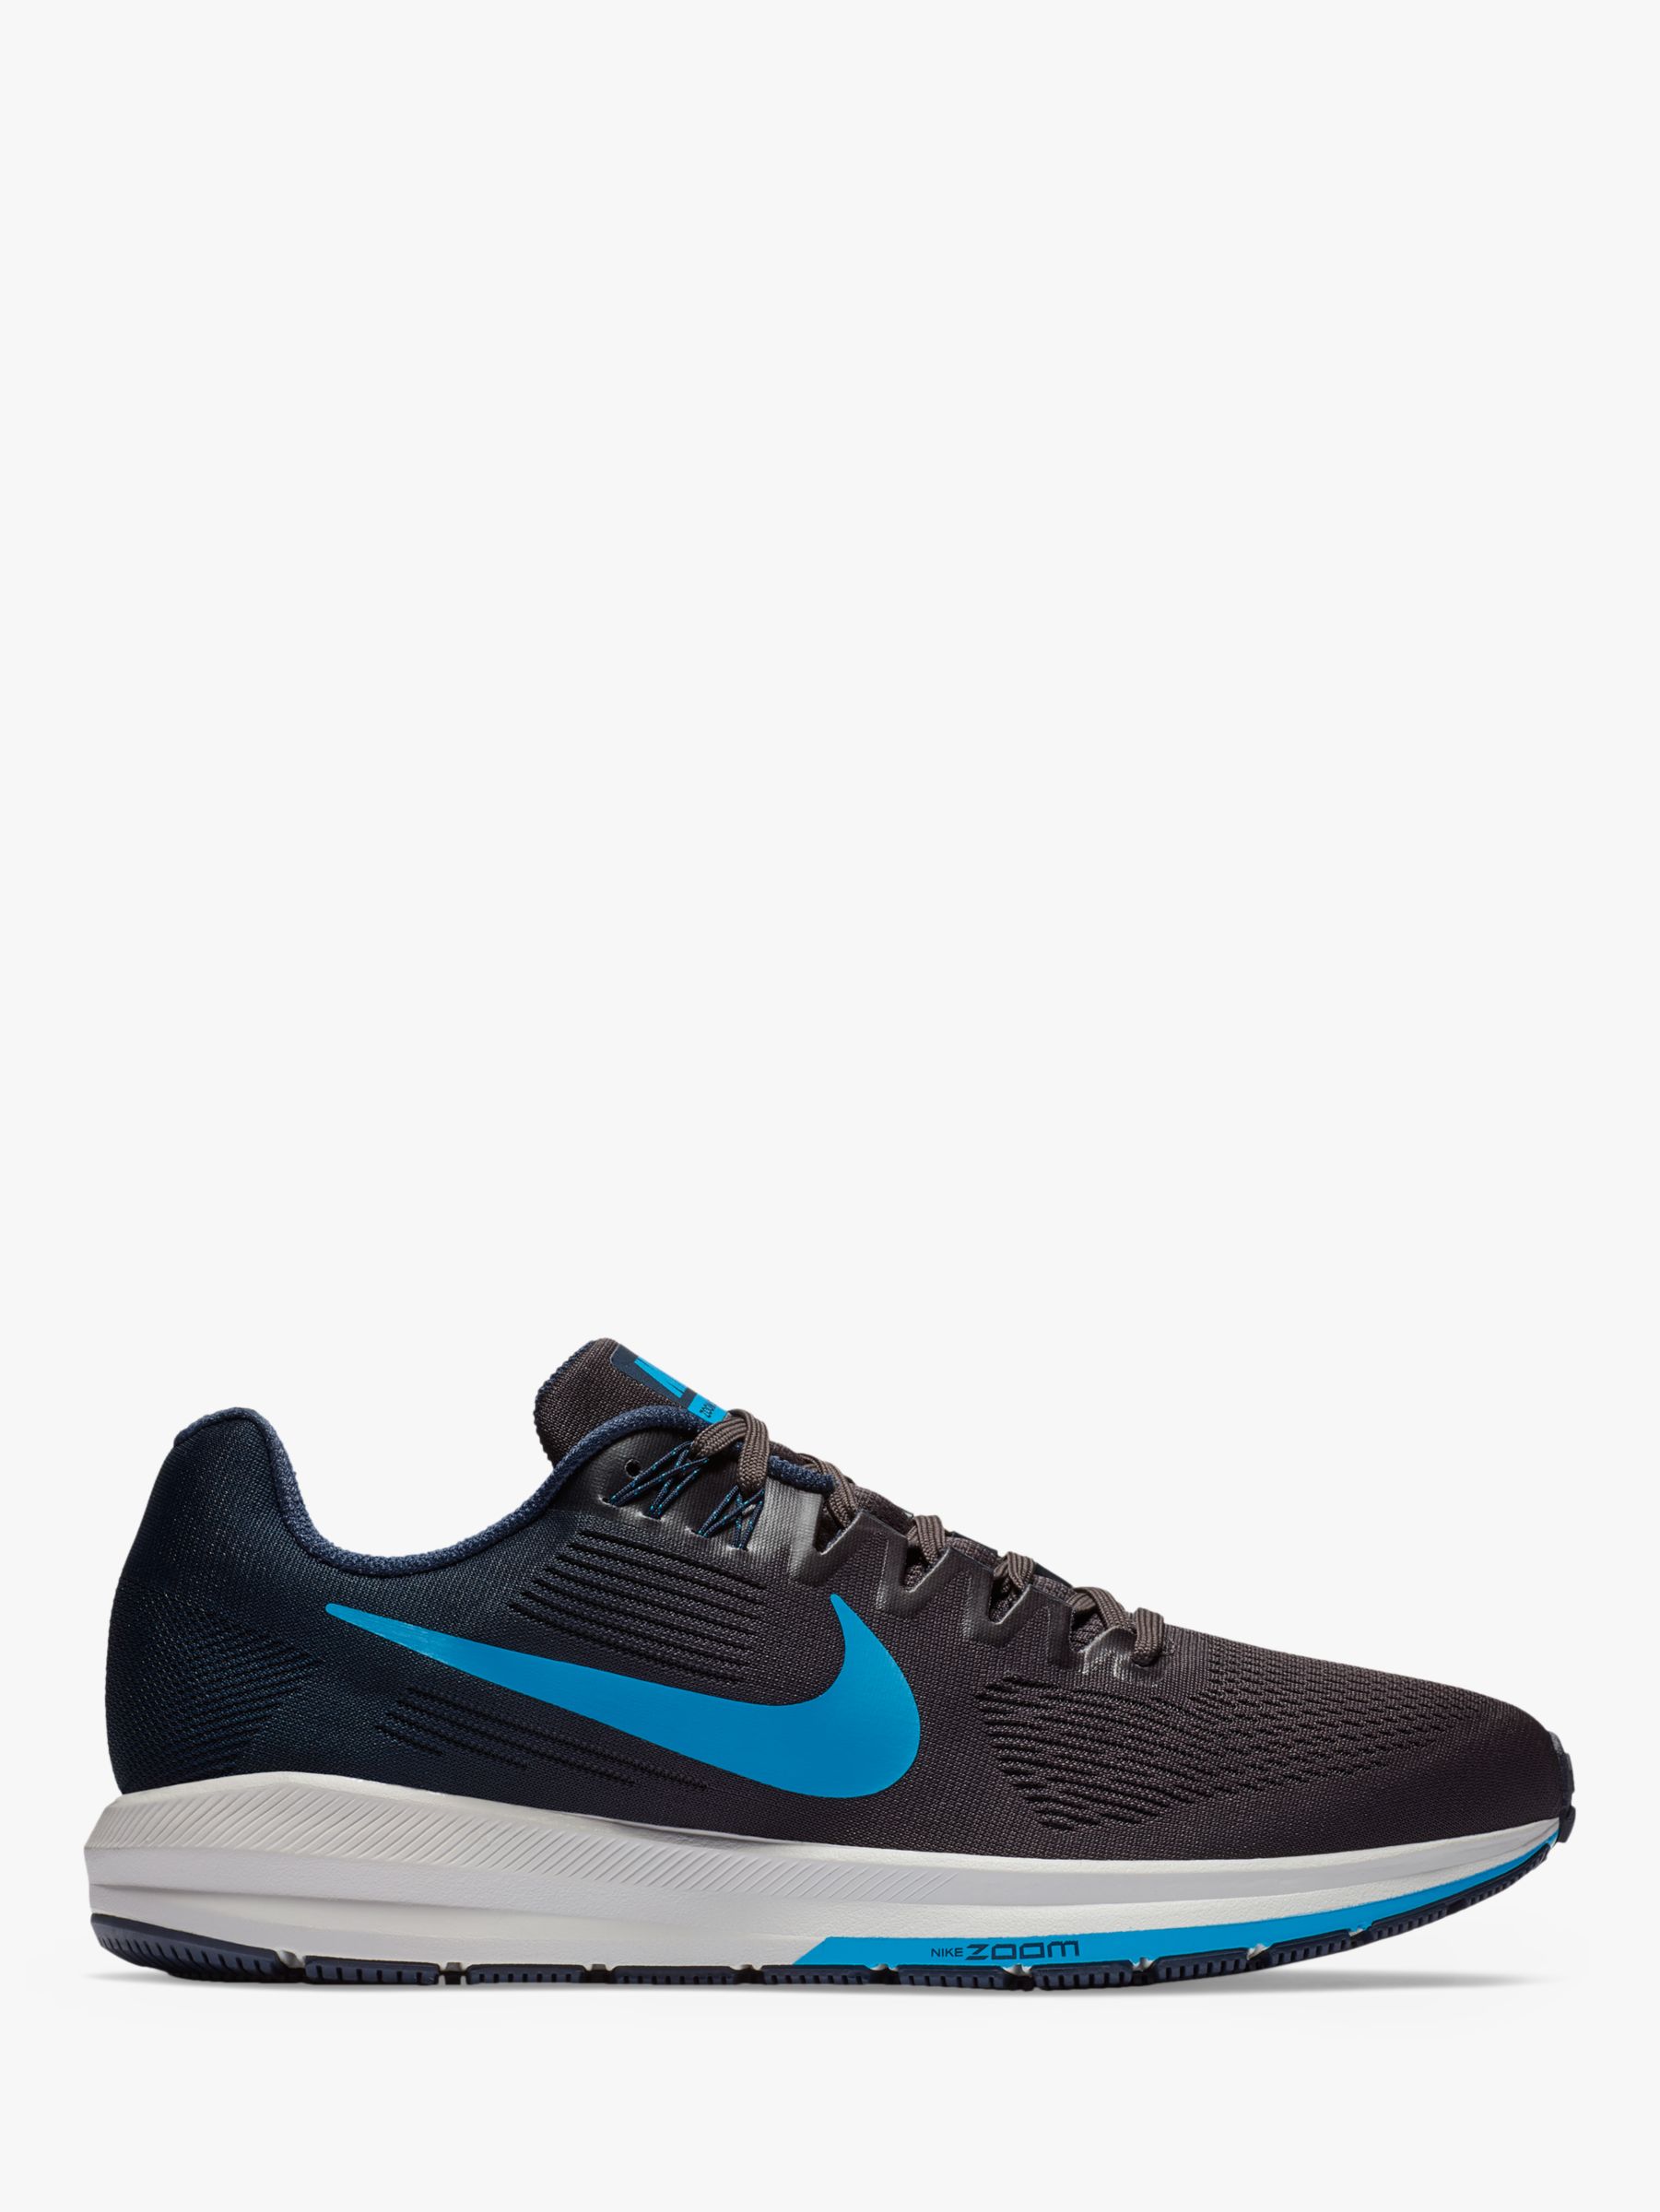 nike structure 21 mens